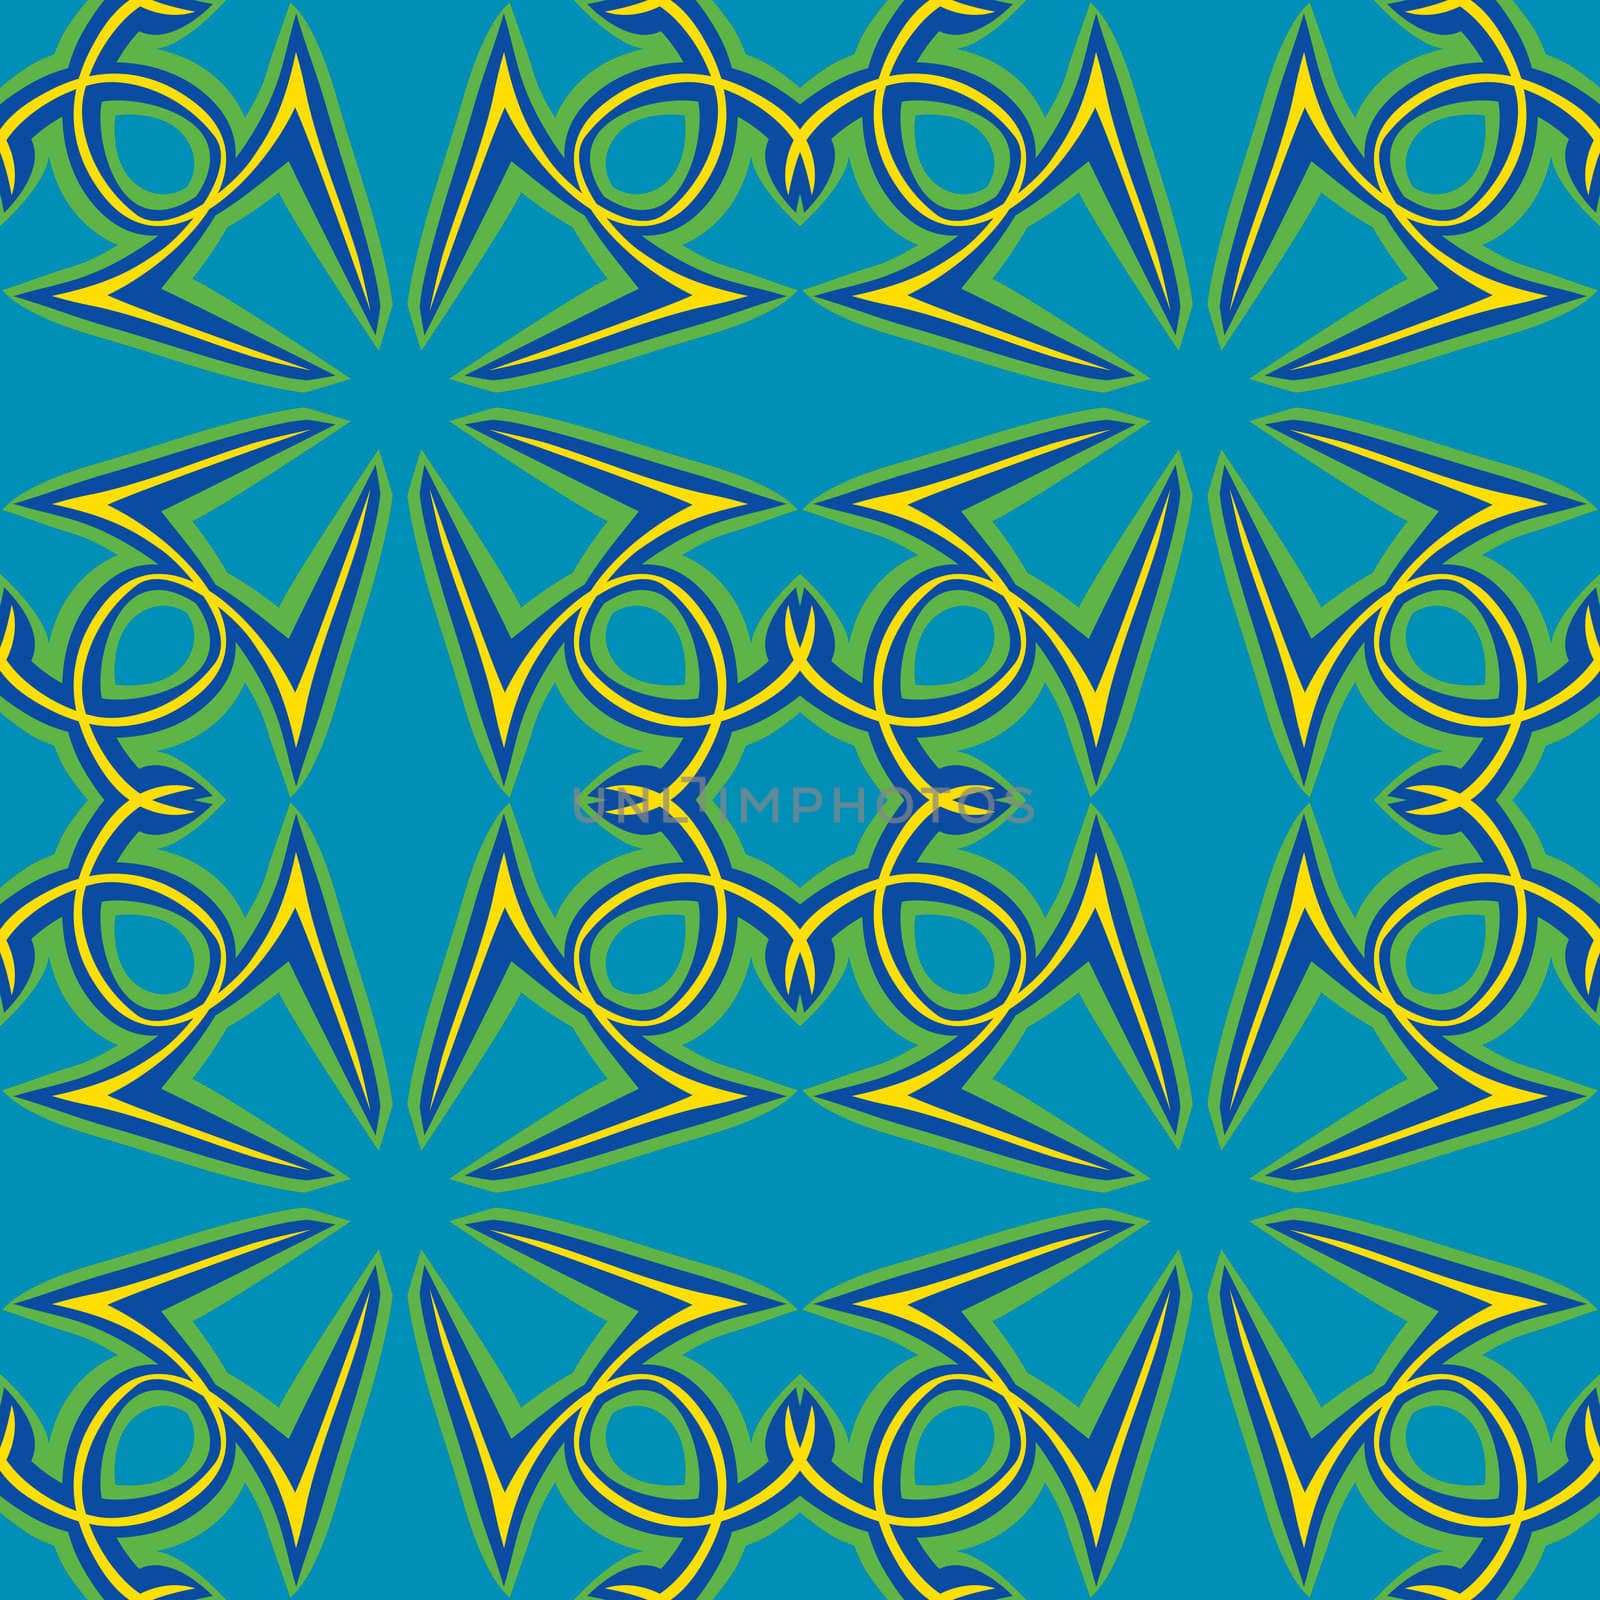 Seamless wallpaper background pattern arranged from the Arabic letter Hamza